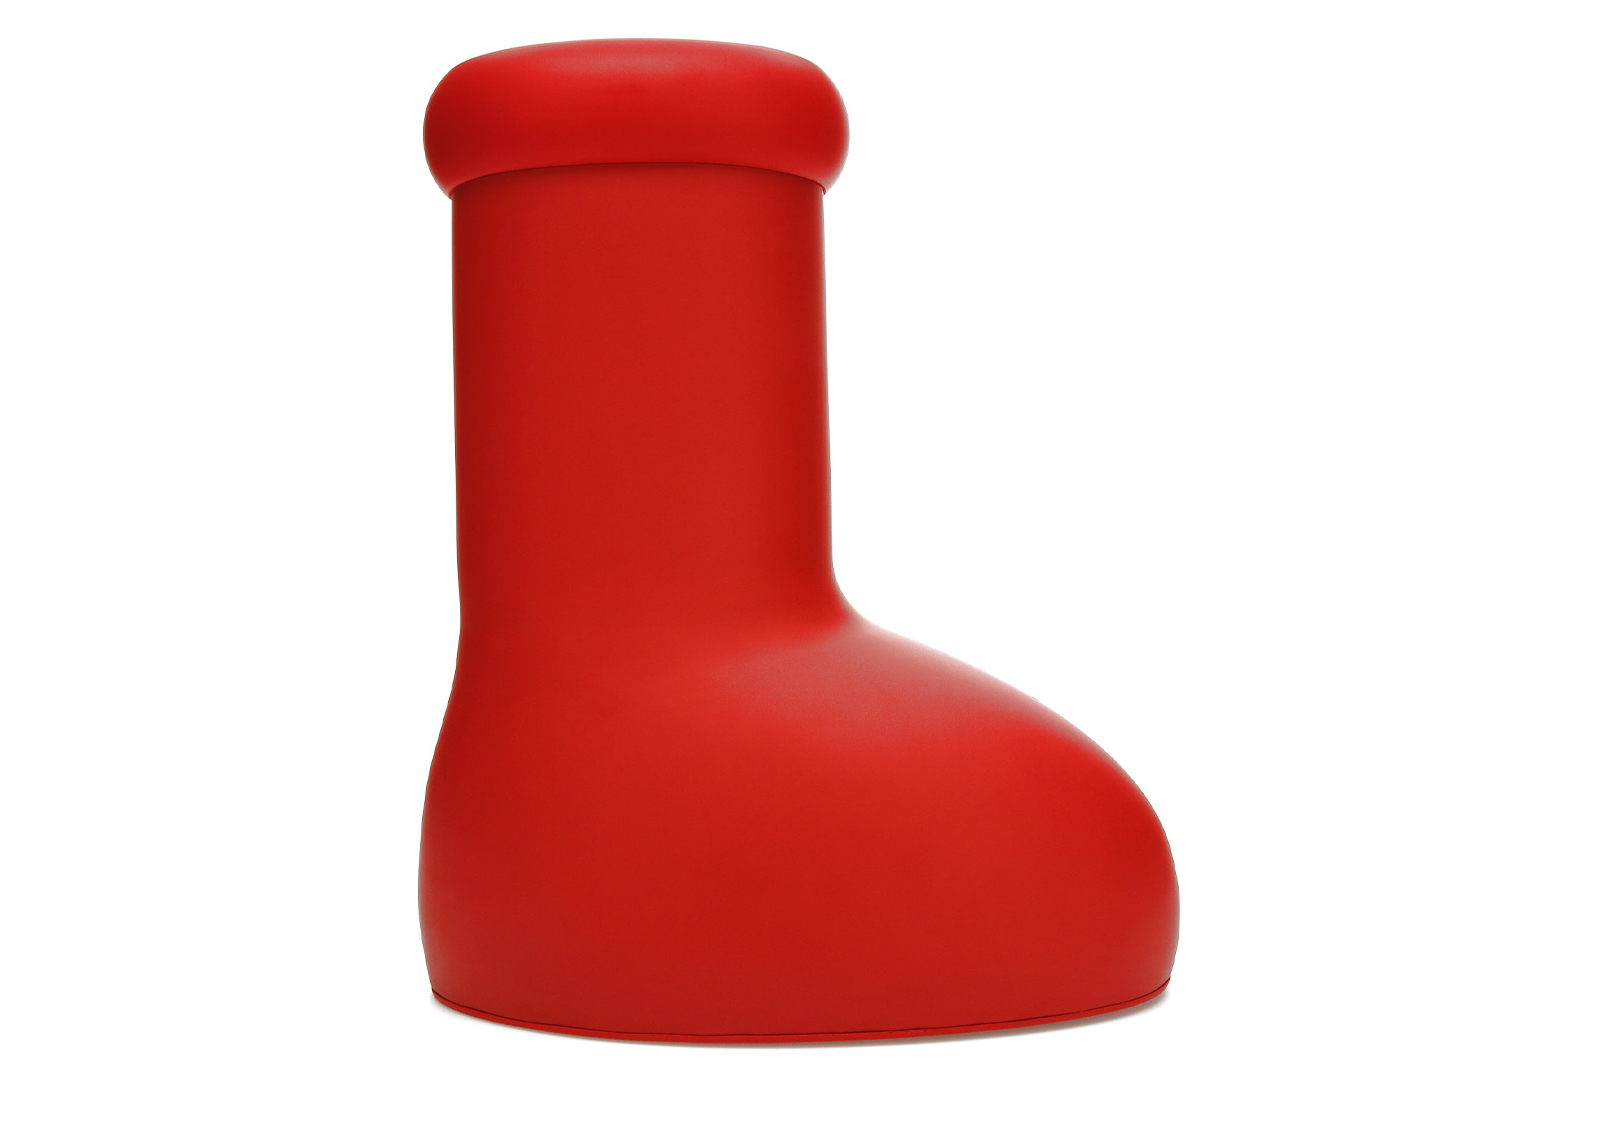 These Big Red Objects From MSCHF Claim to Be Boots  The New York Times